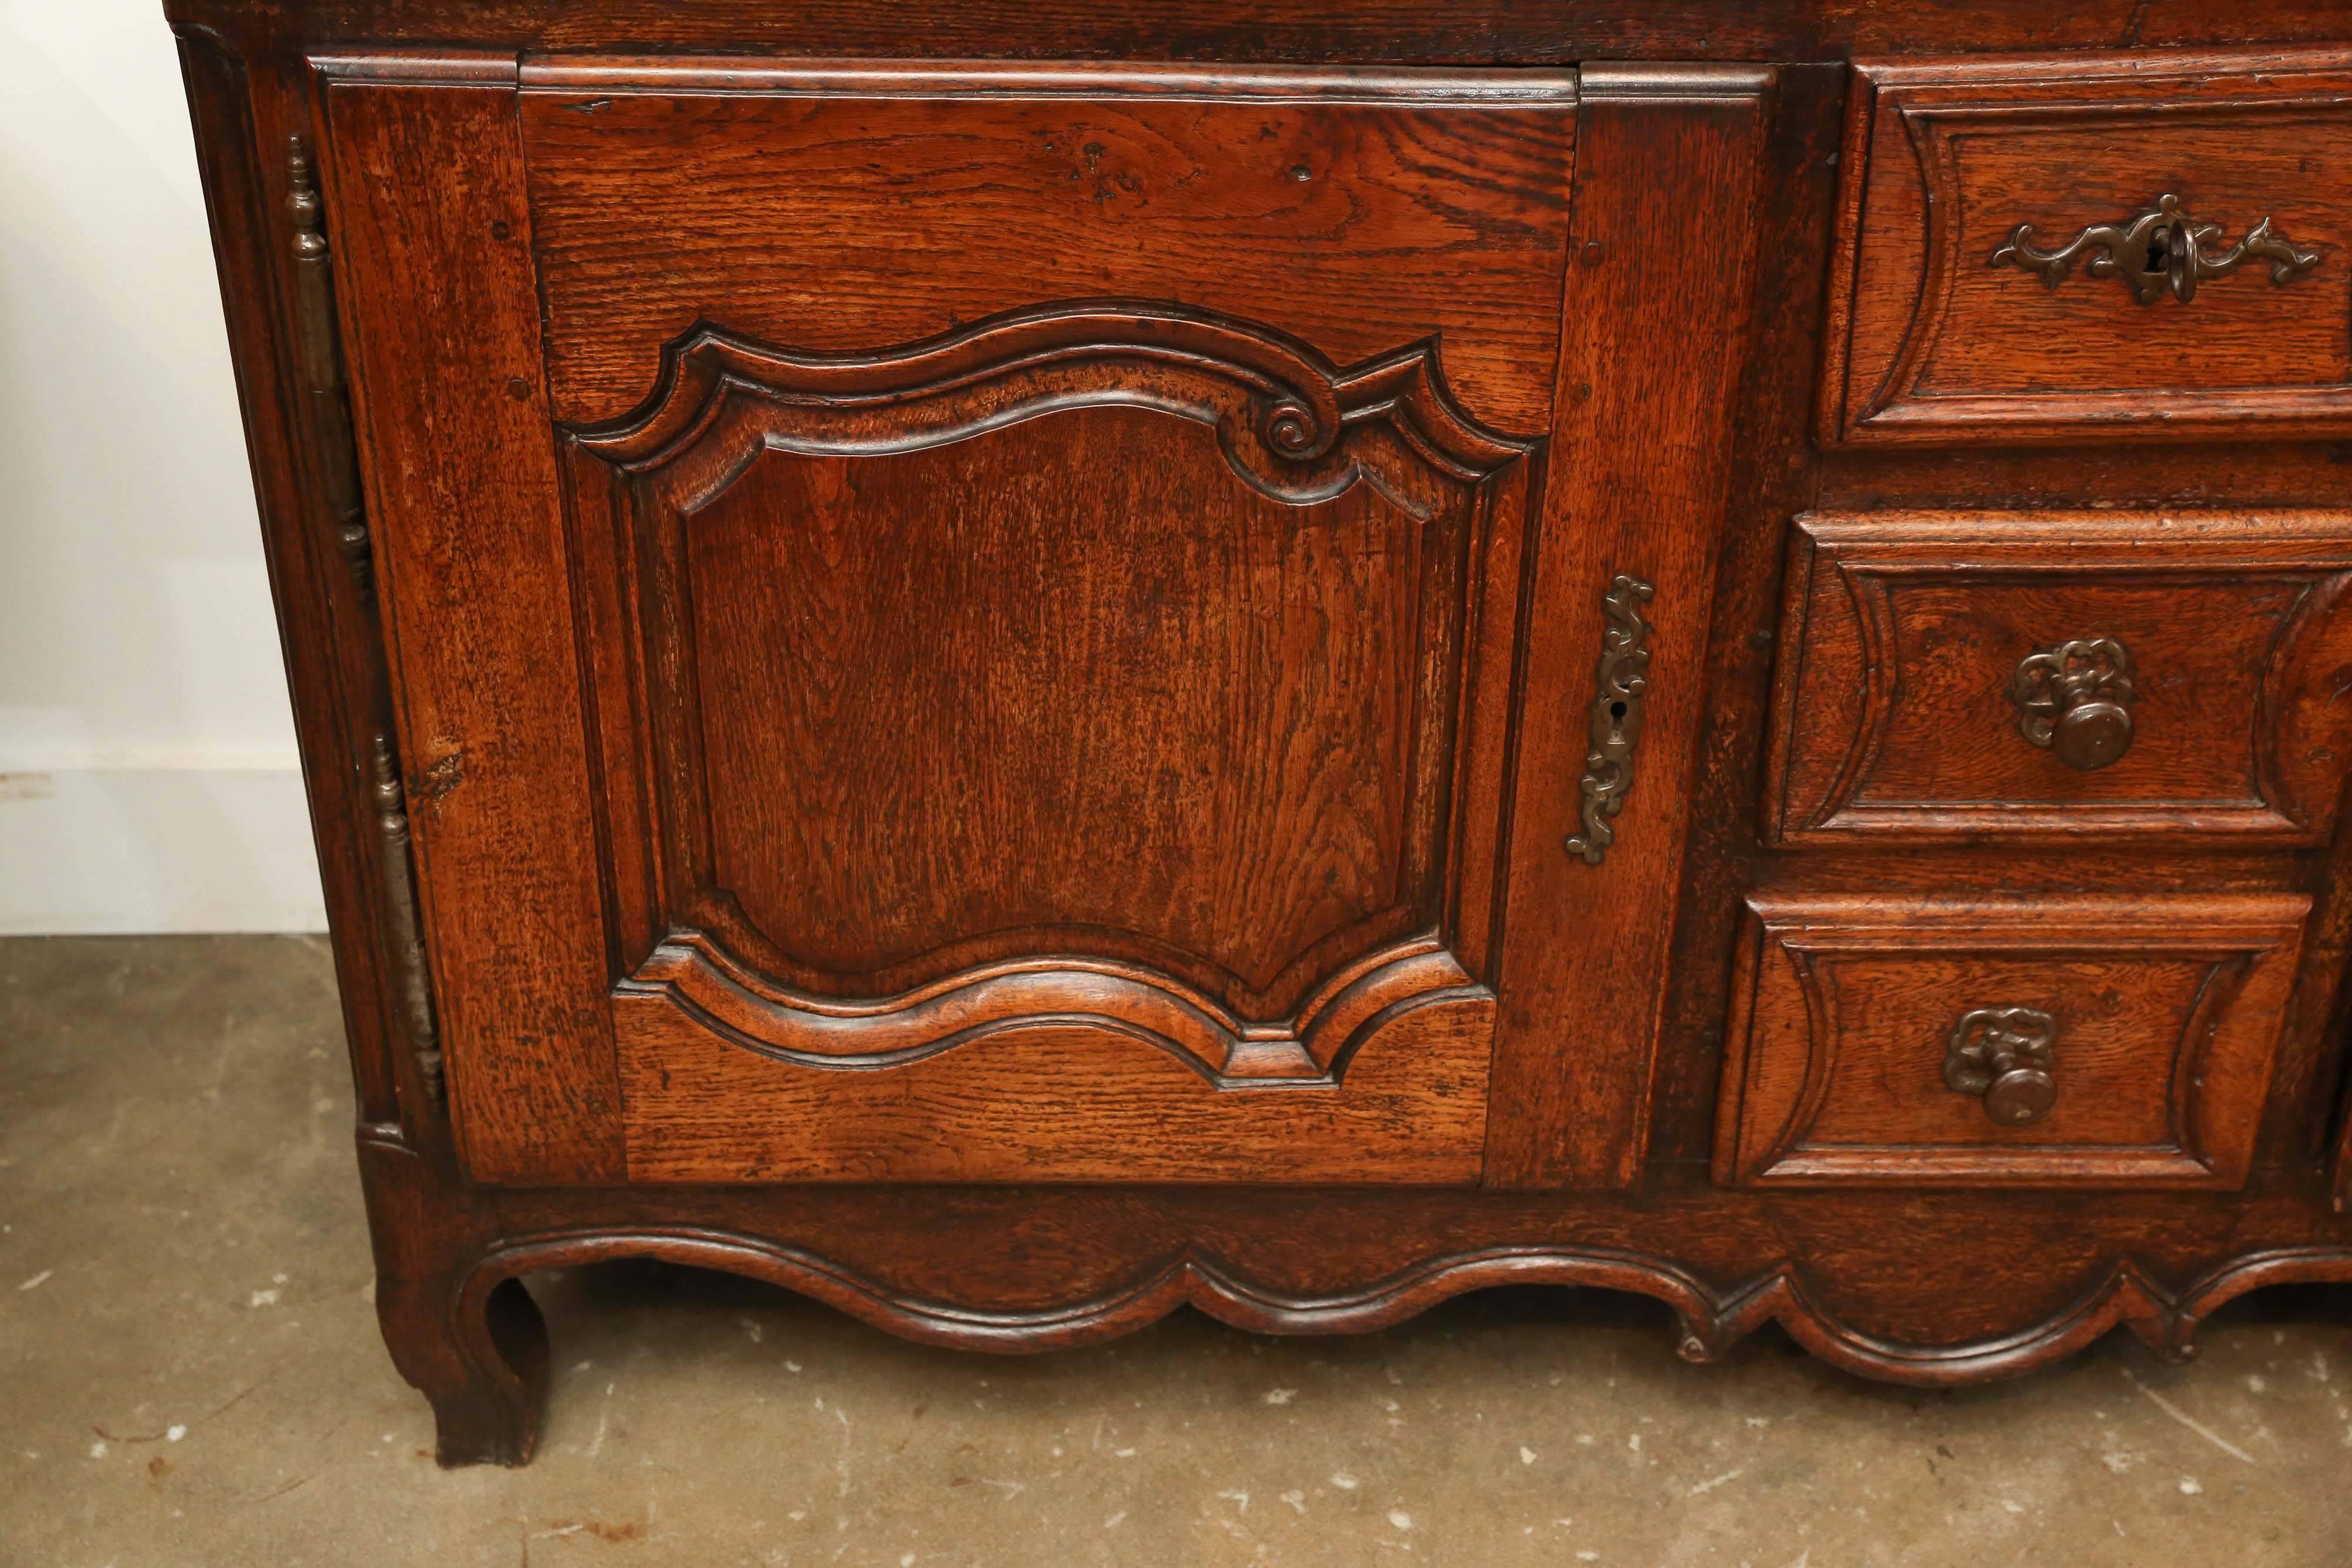 18th century Louis XV oak buffet with two doors and three small drawers in the center. The weight and 1